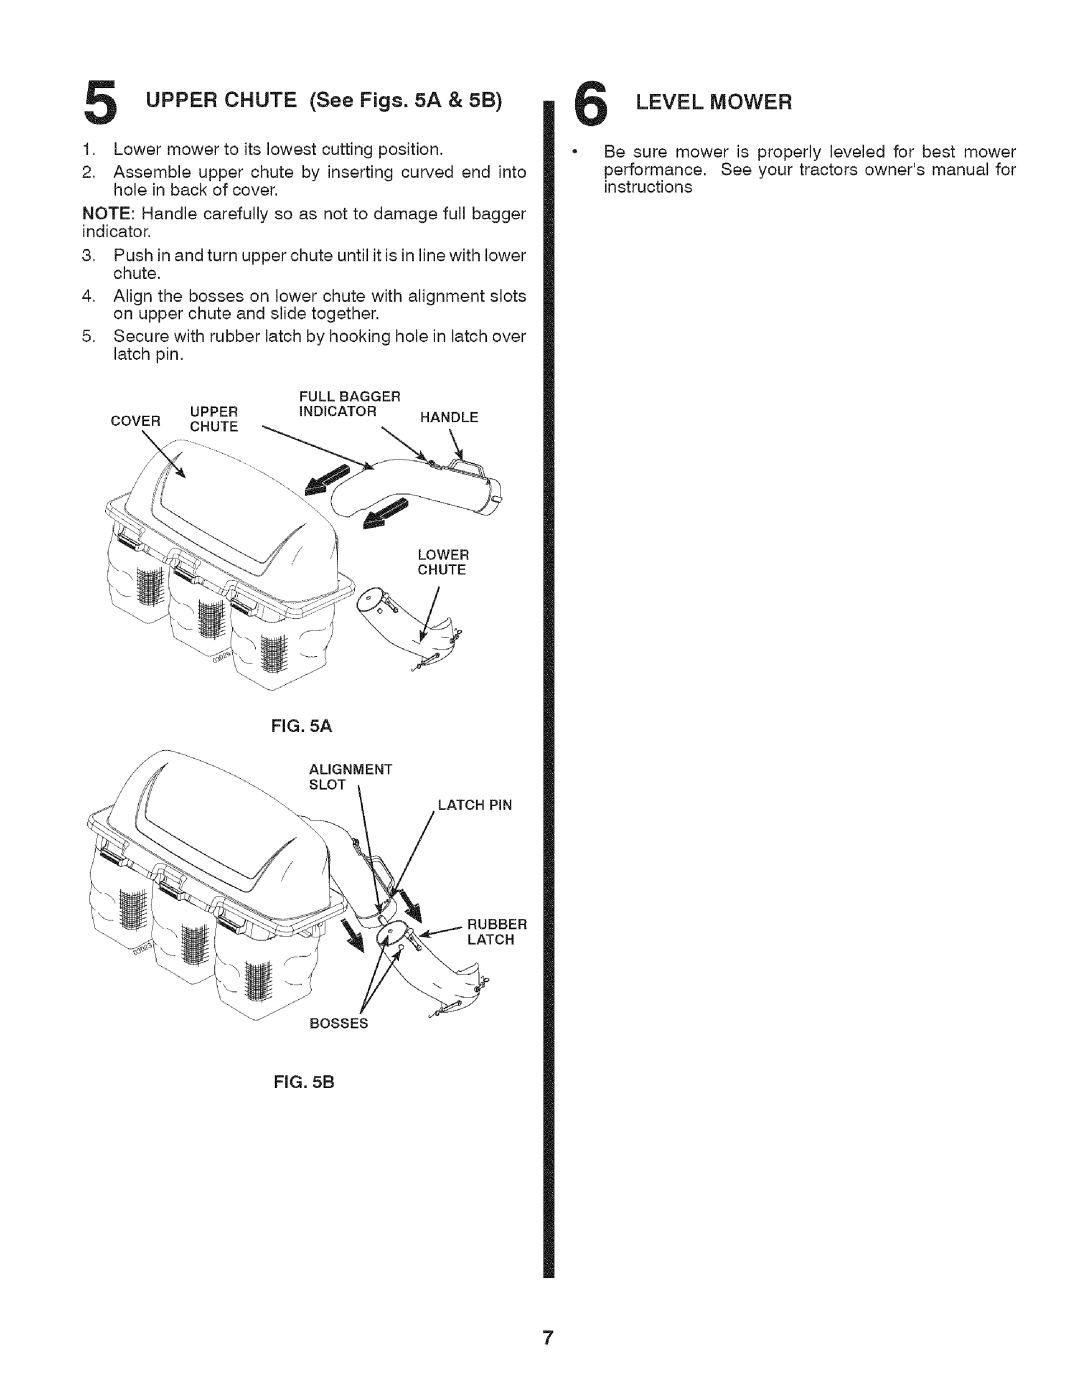 Craftsman 917.24899 owner manual UPPER CHUTE See Figs, 5A & 5B, Level, Mower 